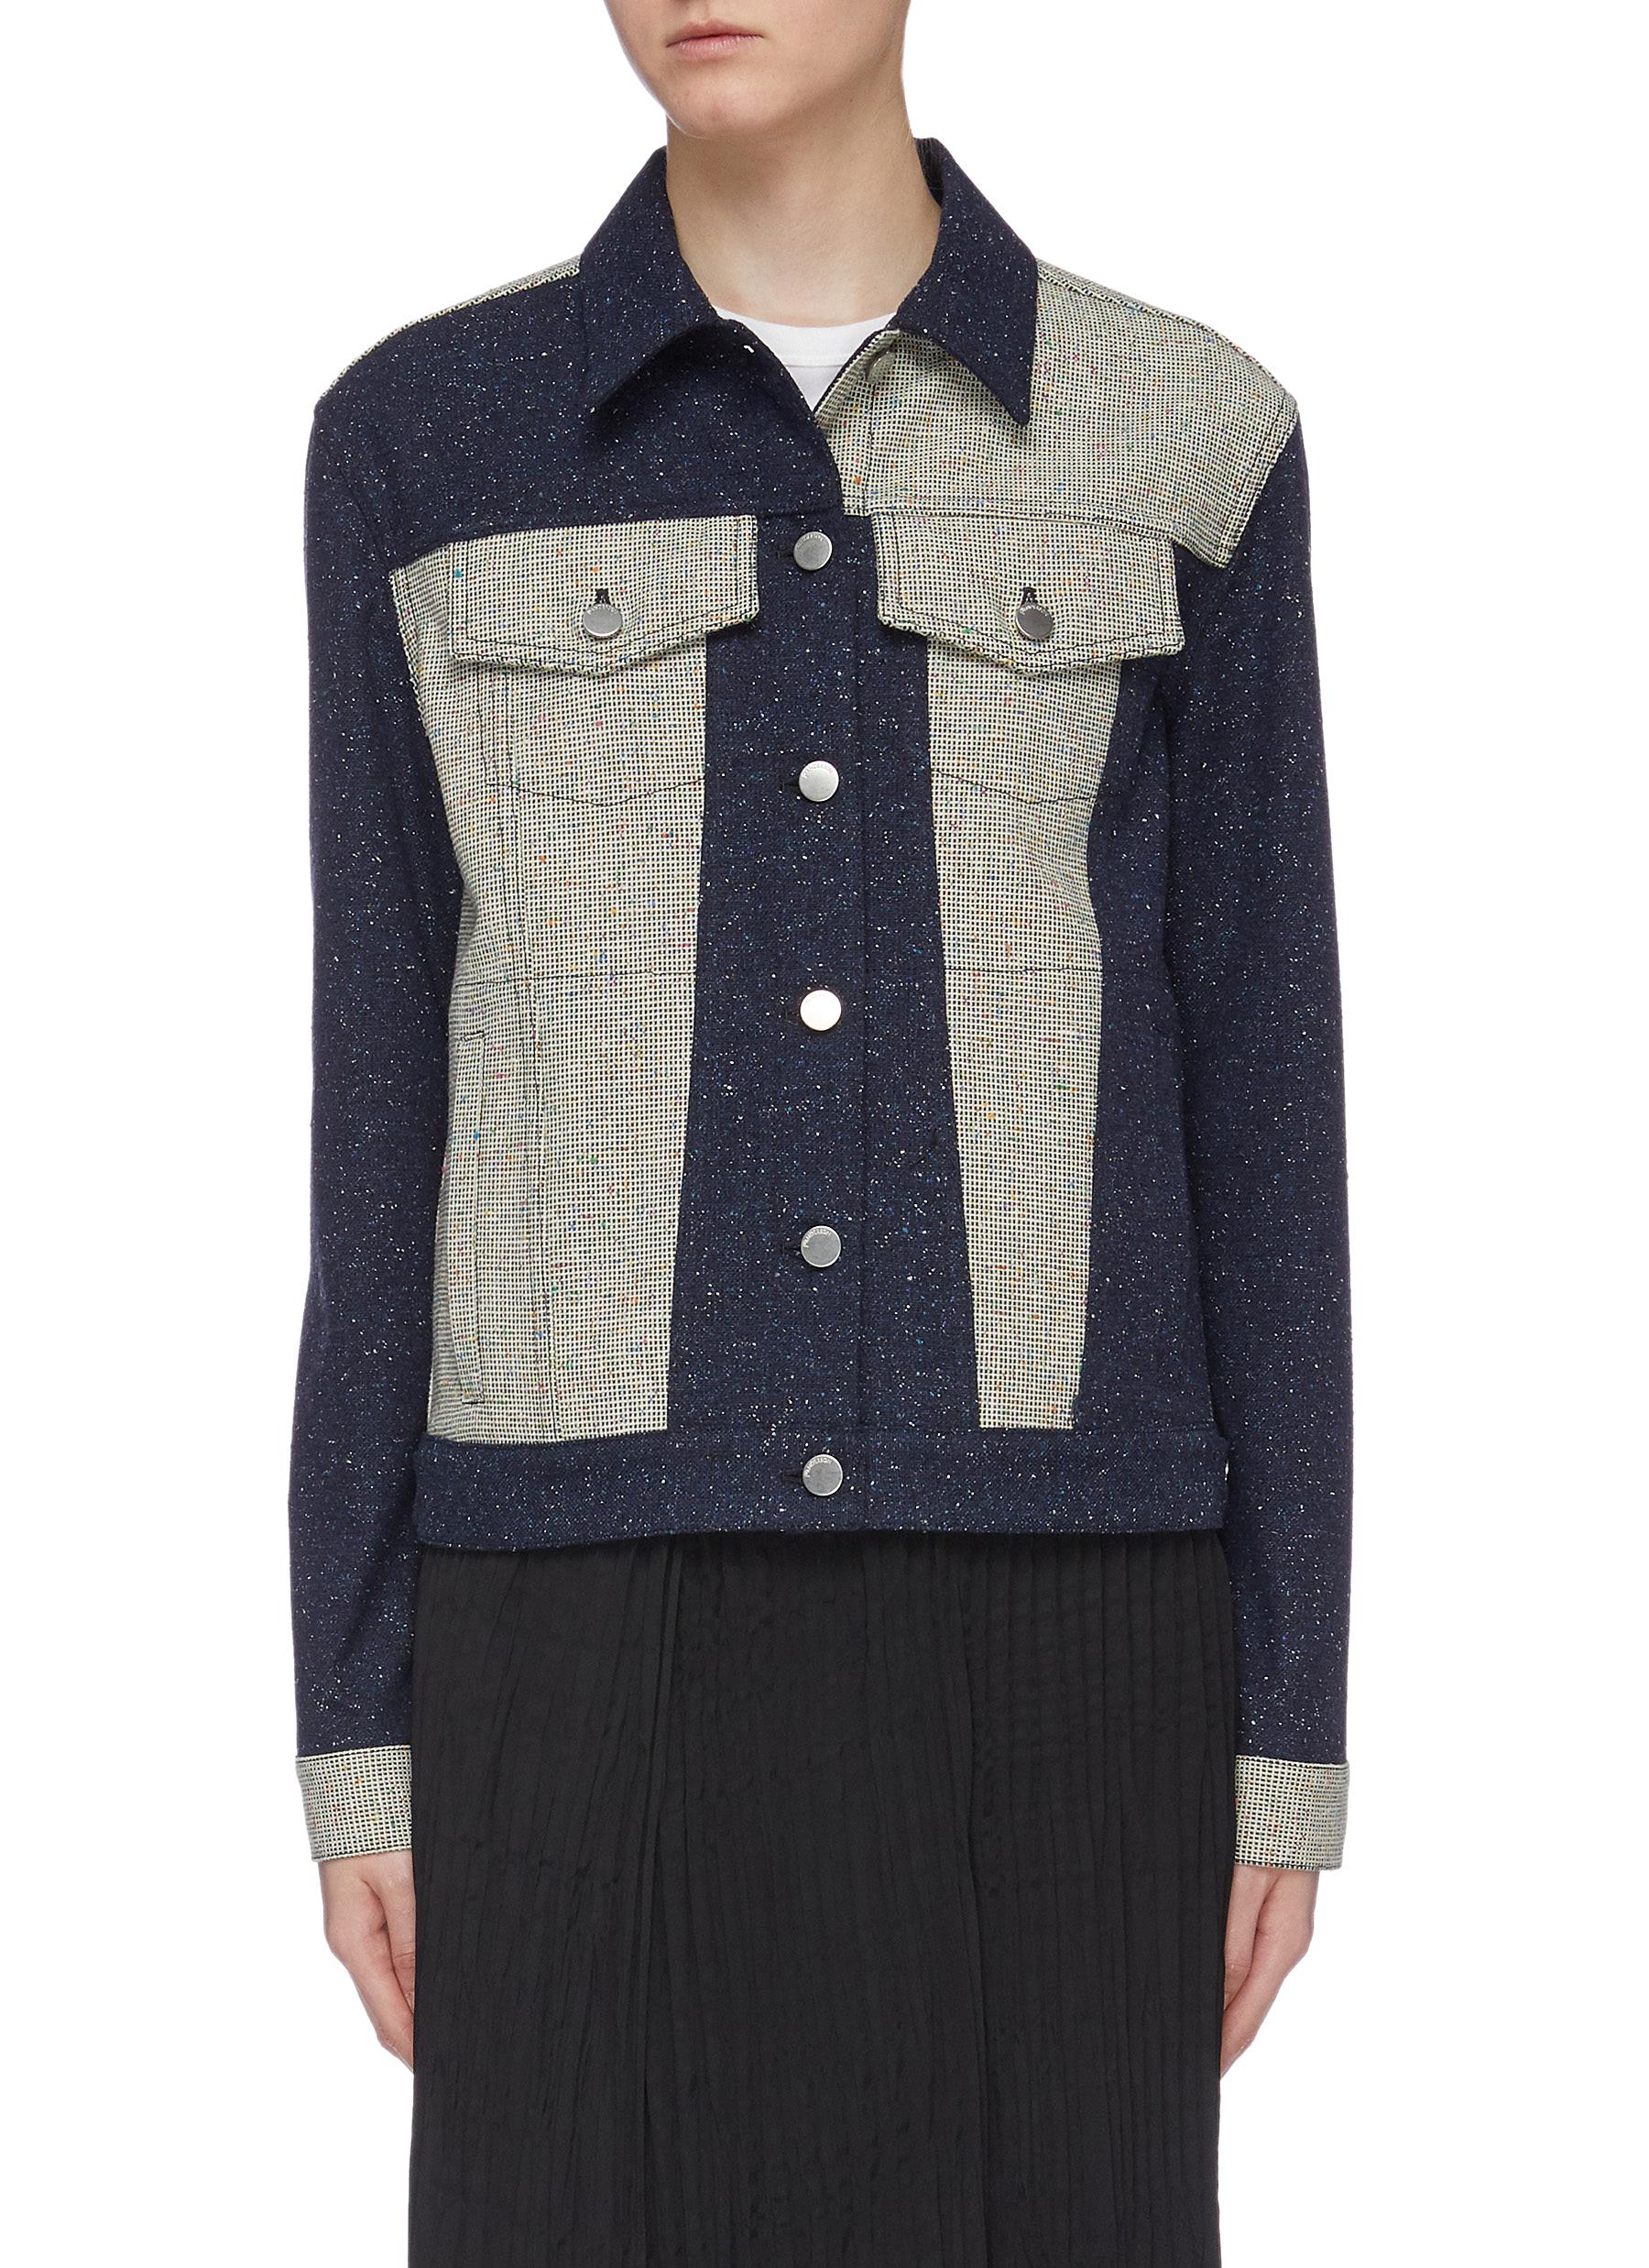 Patchwork speckled trucker jacket by Jw Anderson